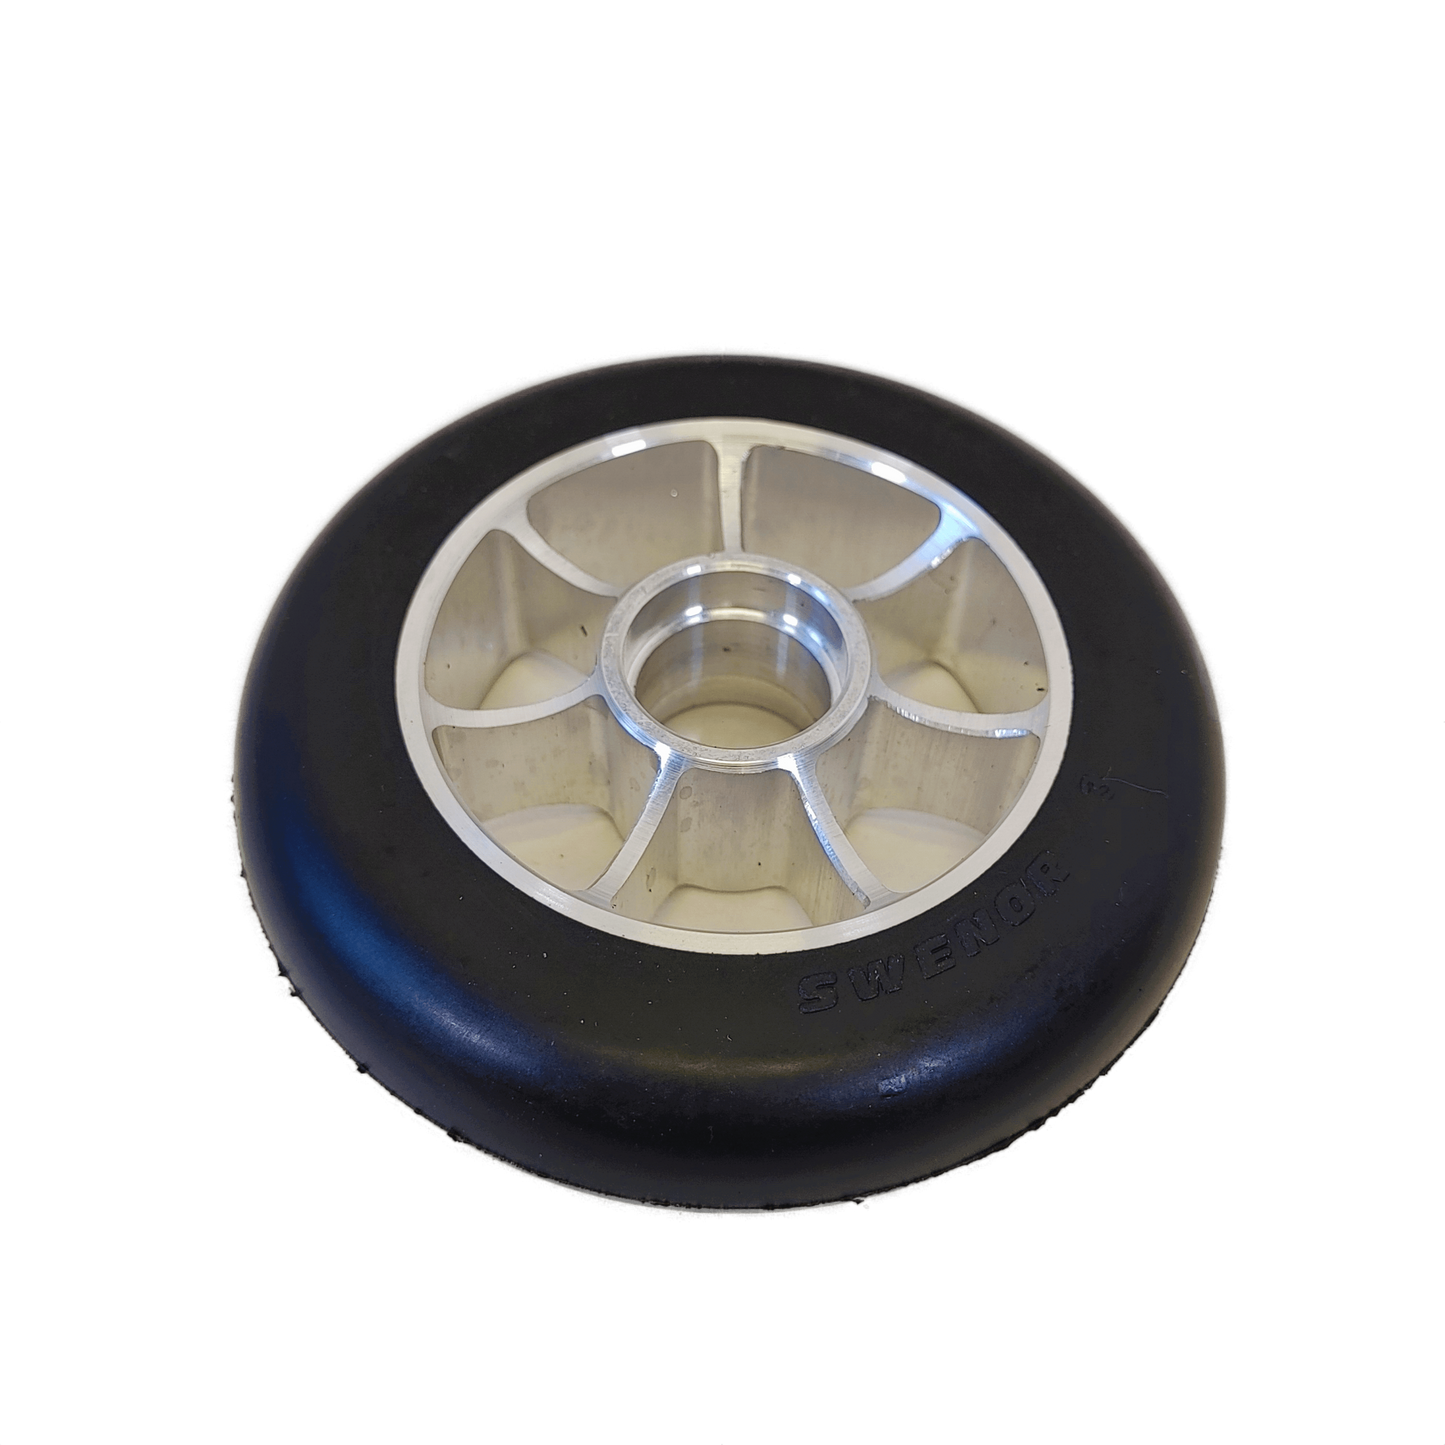 A product picture of the Swenor Skate Wheel (No Bearings)